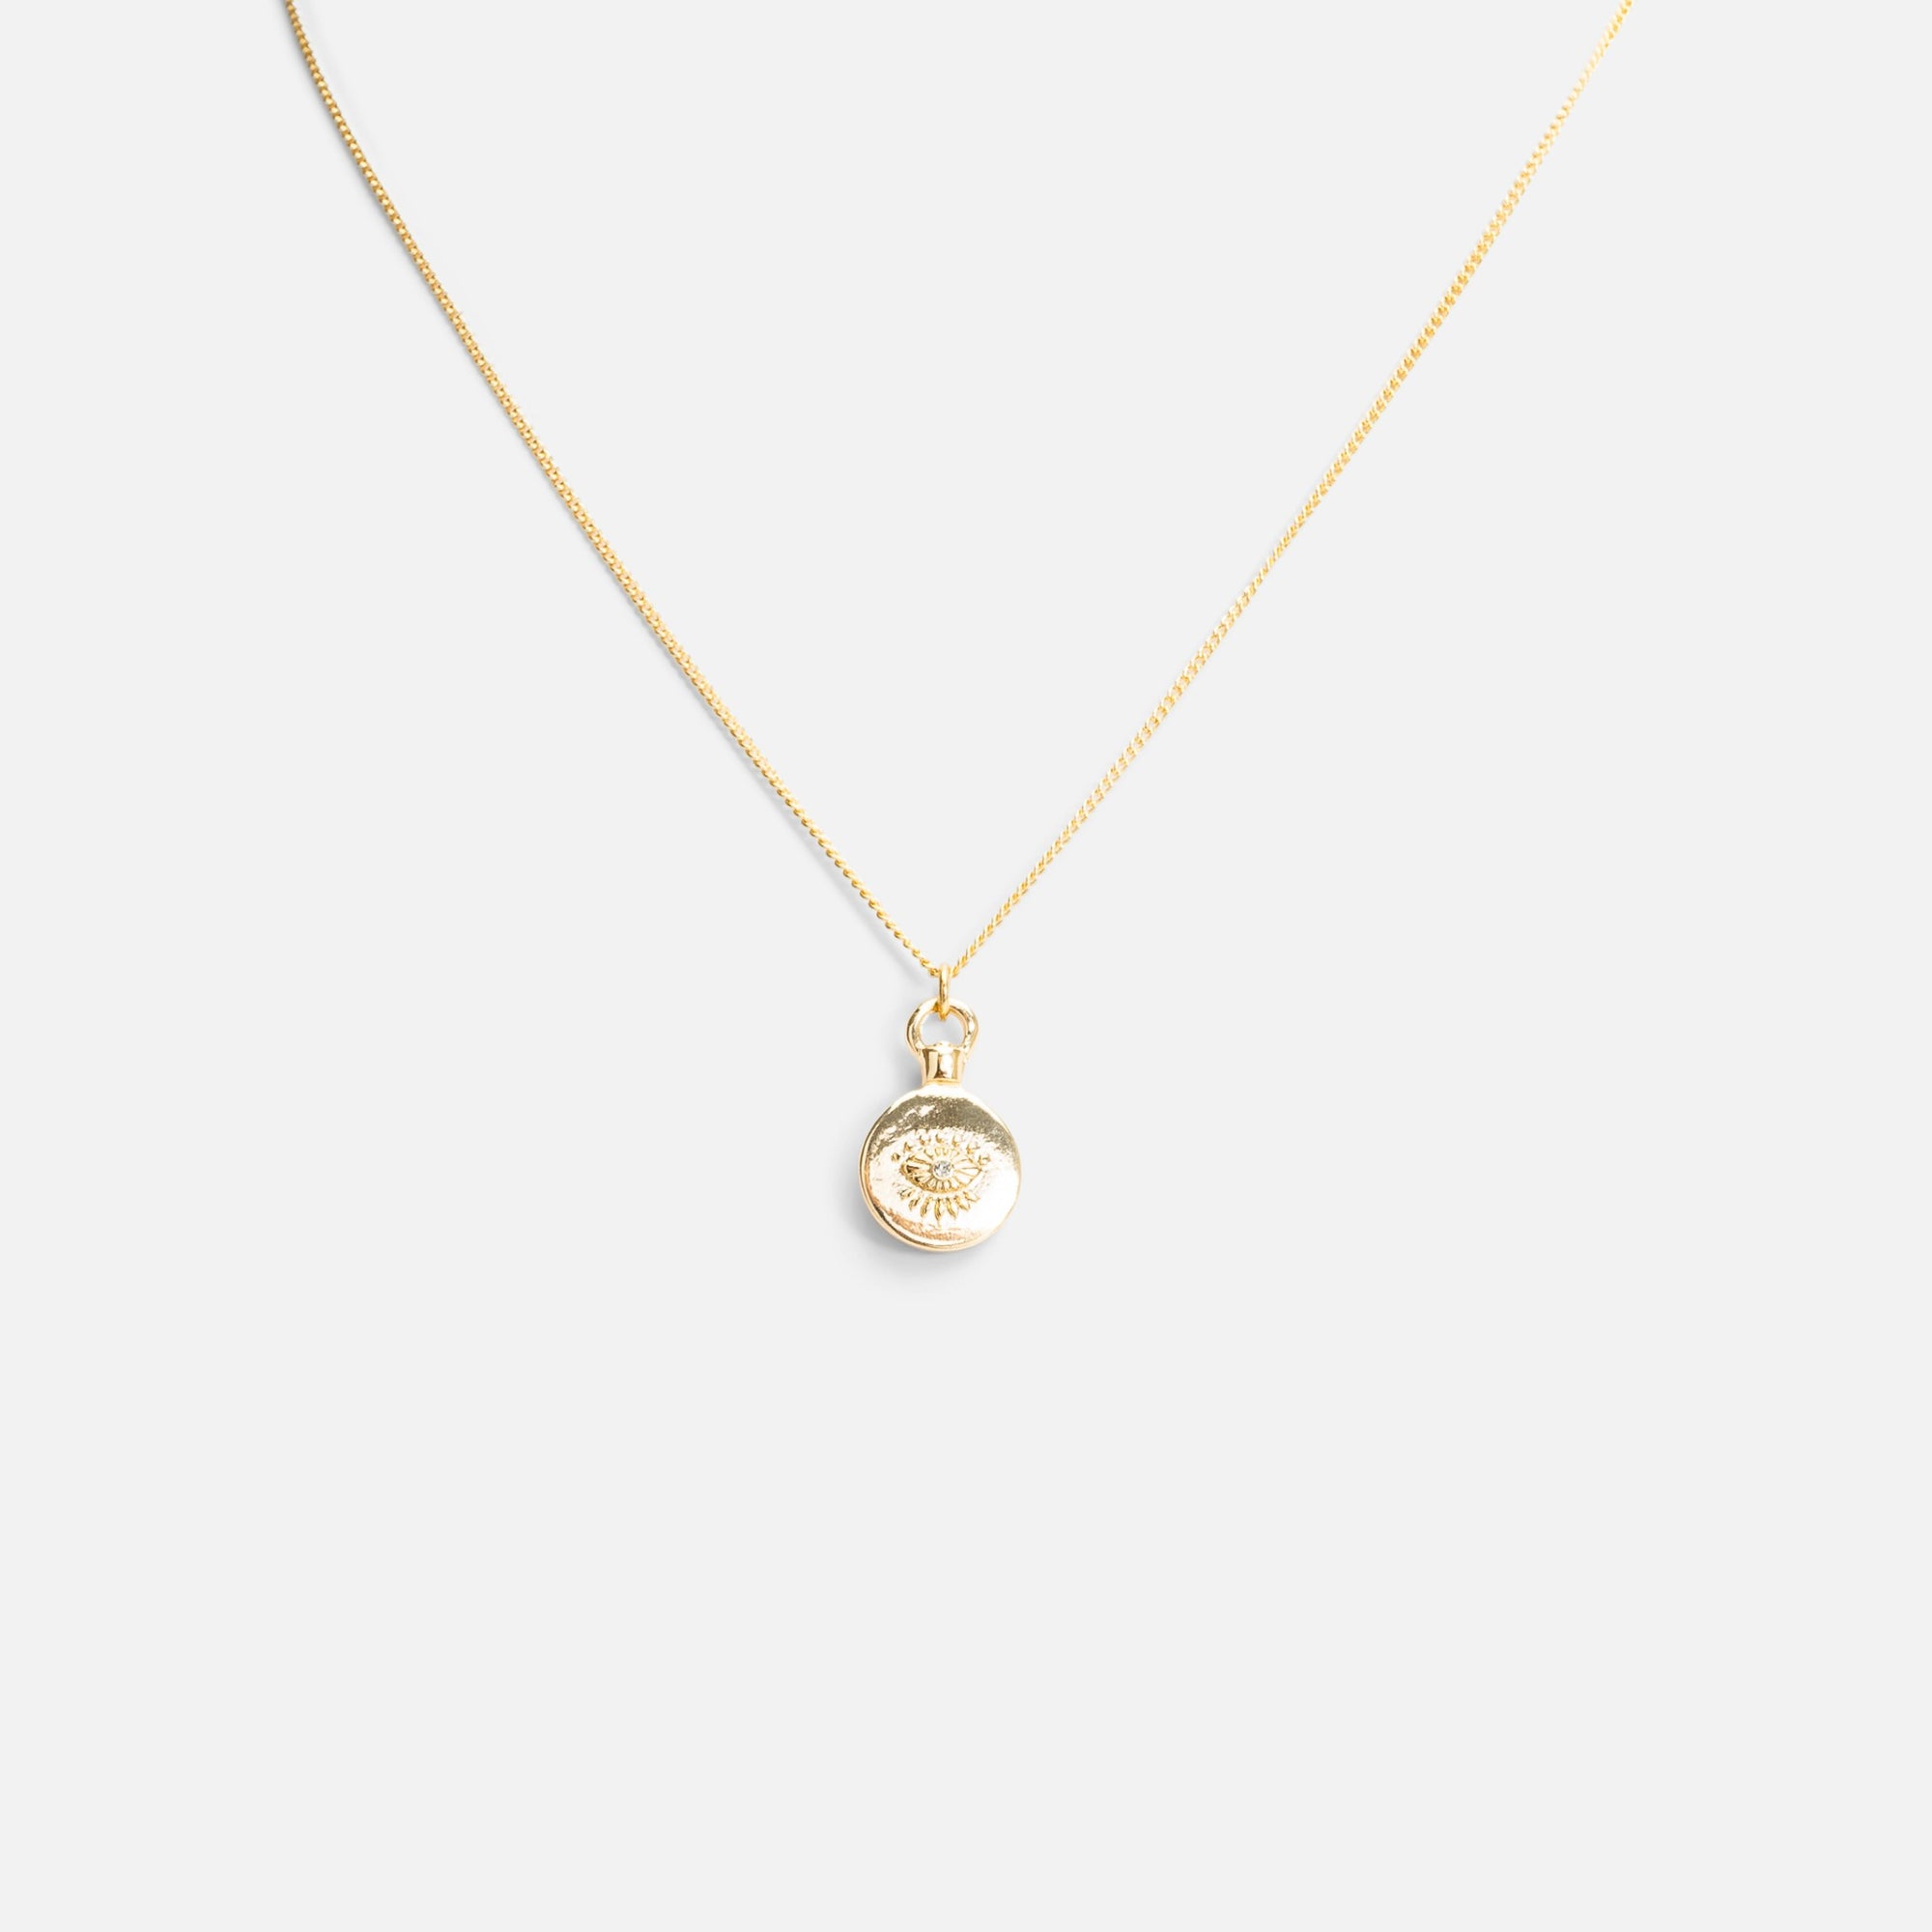 Reversible golden pendant with eye and star medallions